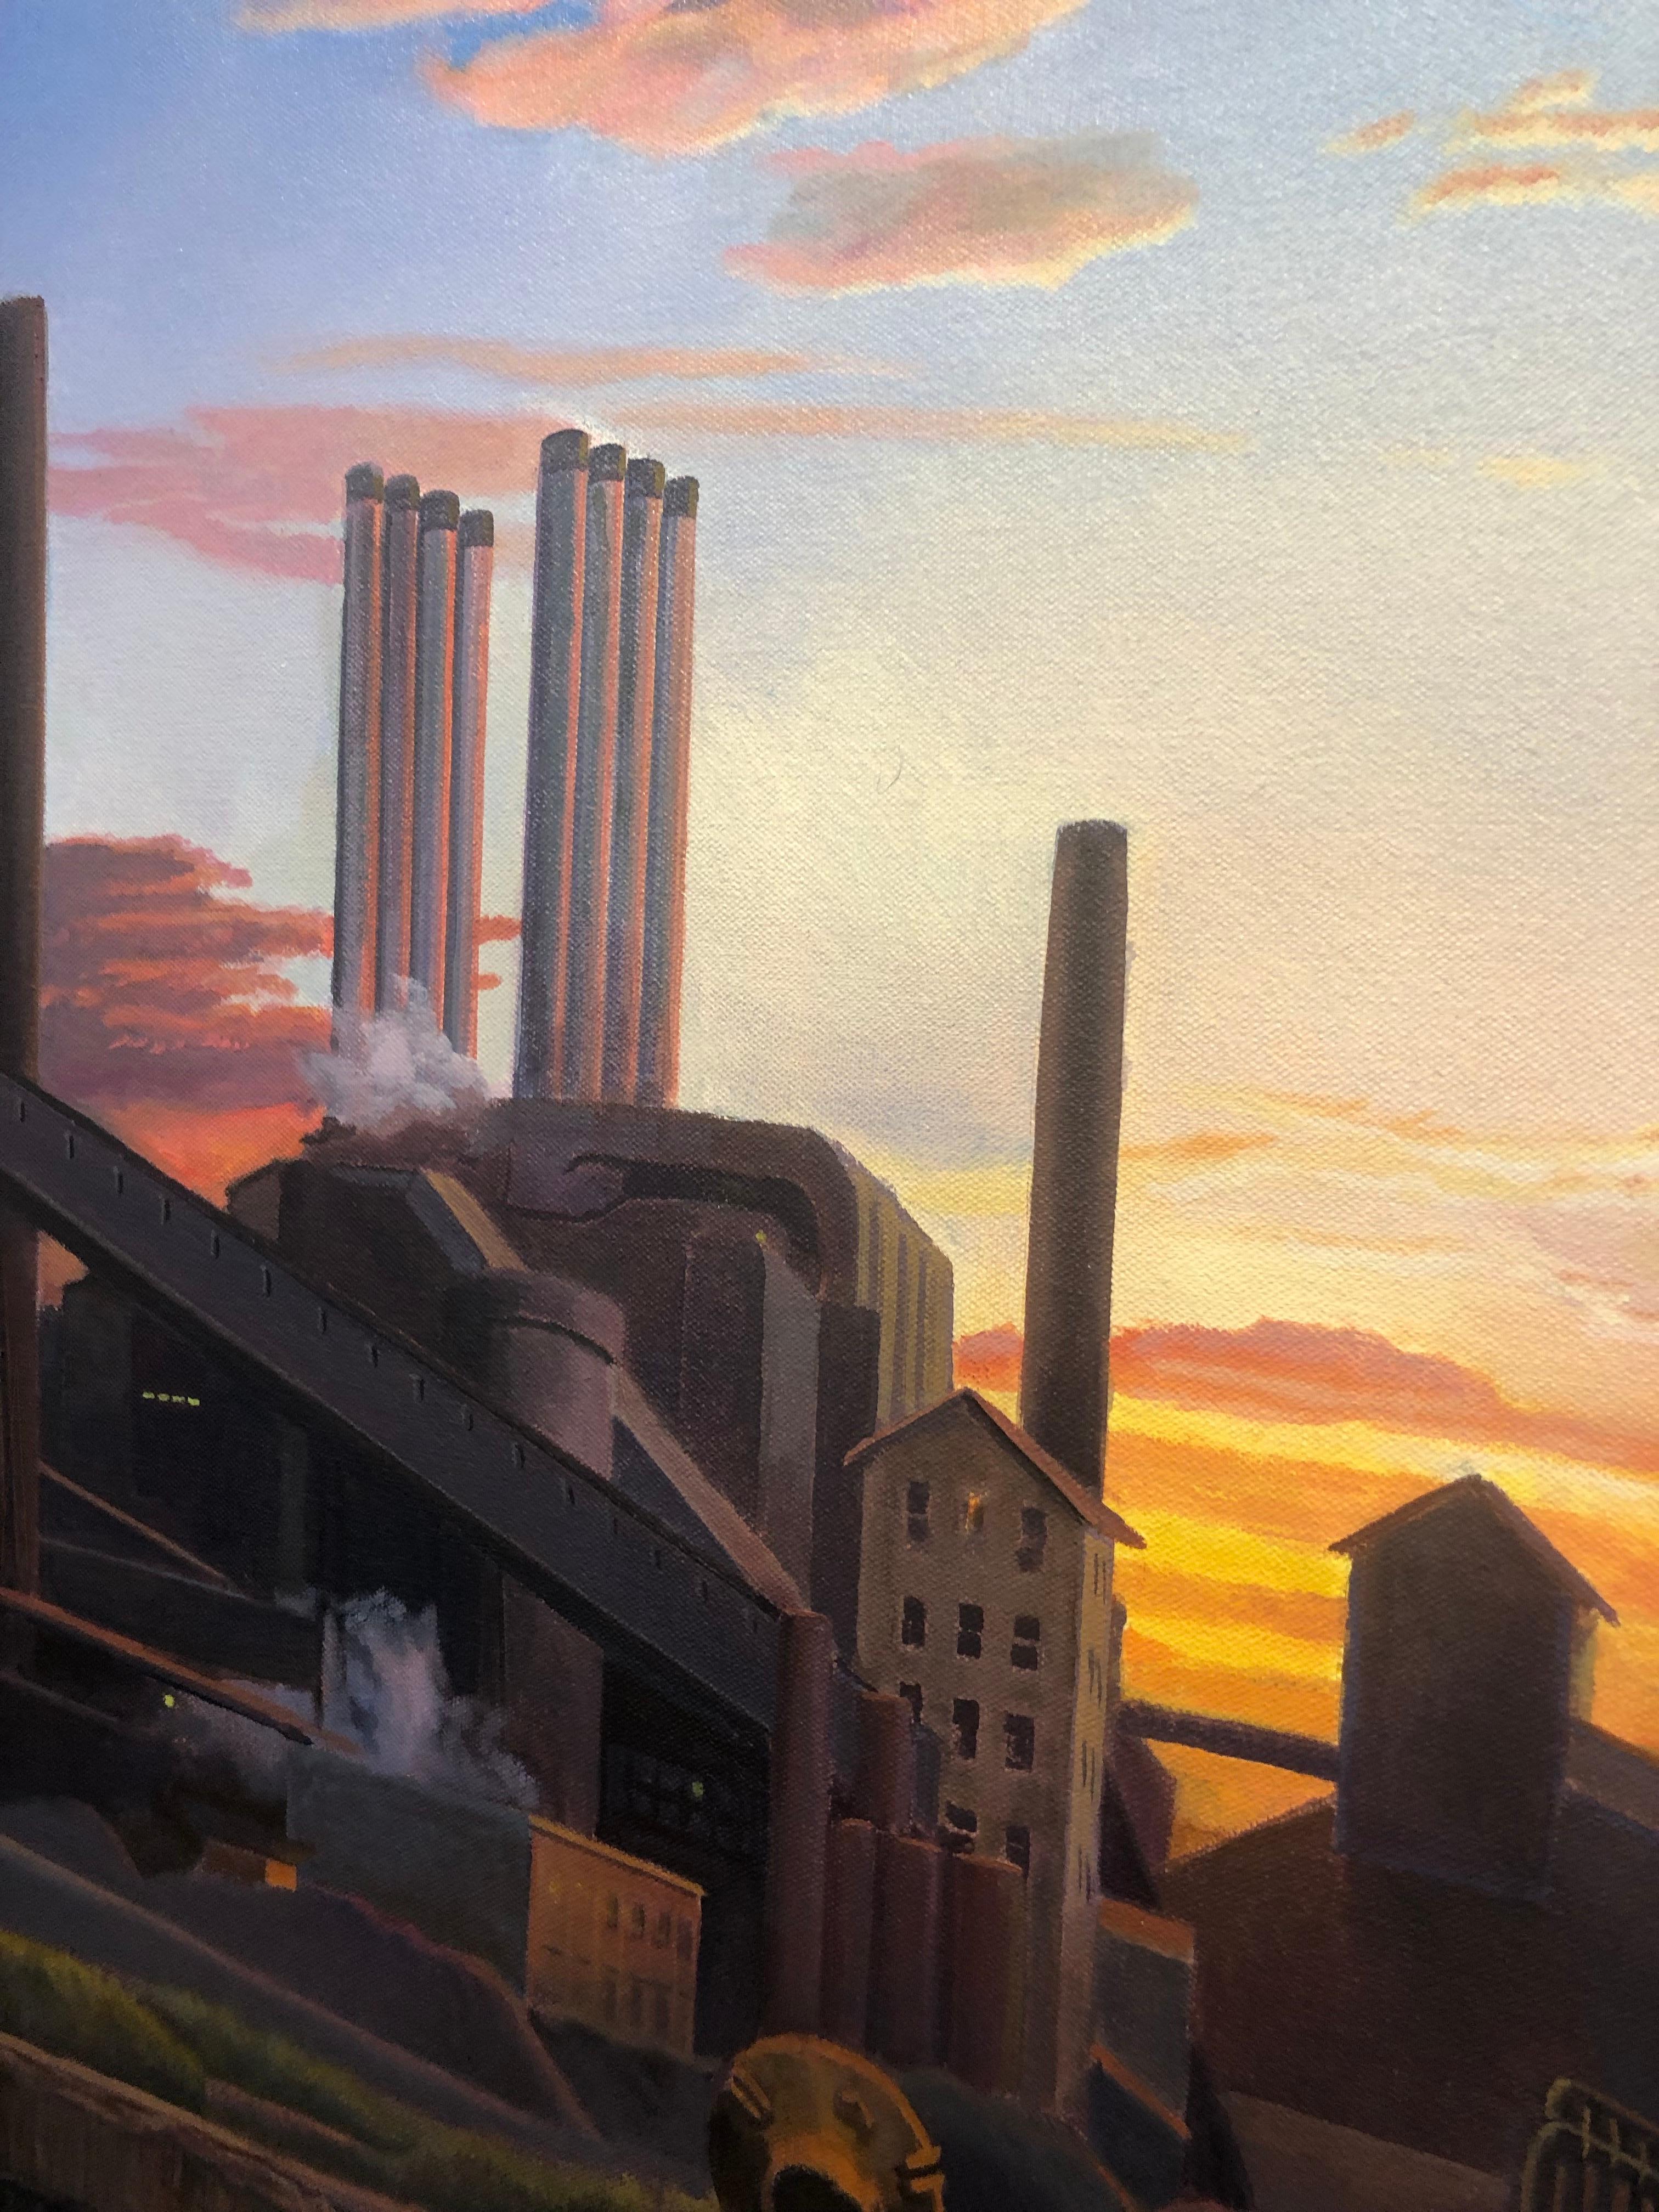 American Landscape - Iconic American Steel Mill Bathed in Orange Sunset Light 4